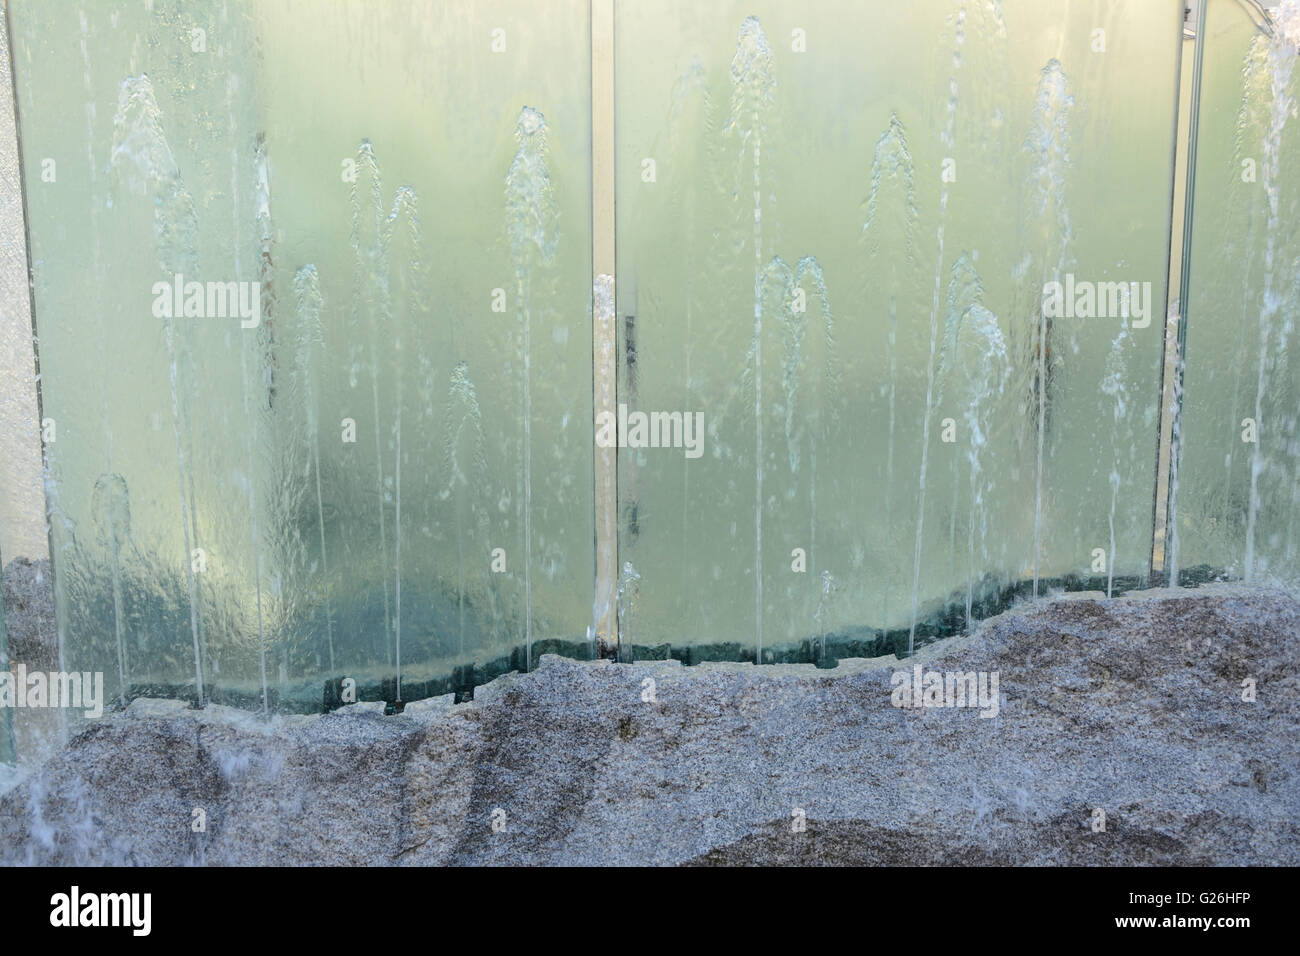 Water splattering in glass fountain - background. Stock Photo